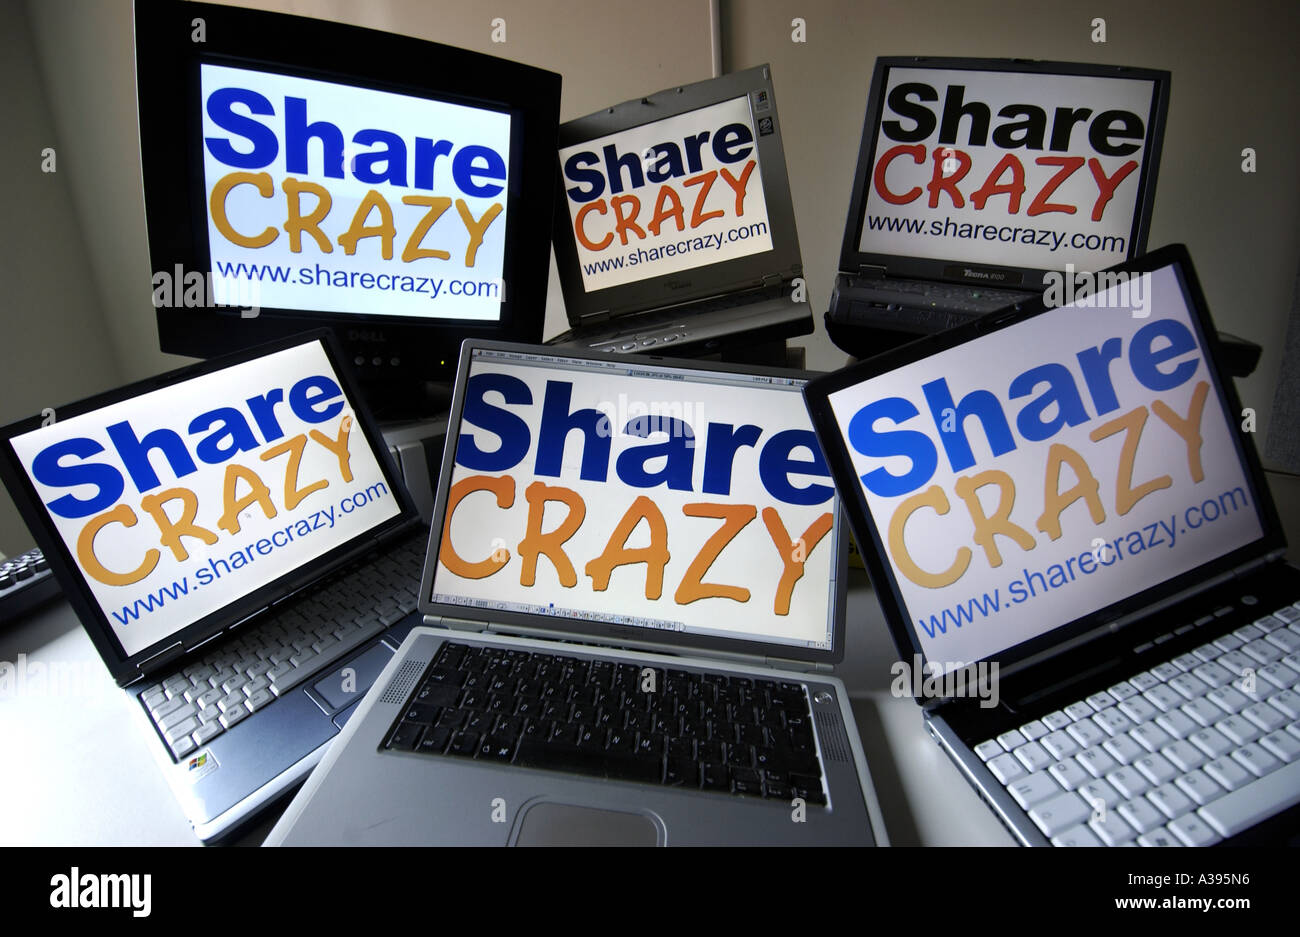 Computers at the office of Share Crazy an online share trading company which provides Yahoo! with a share buying service Stock Photo